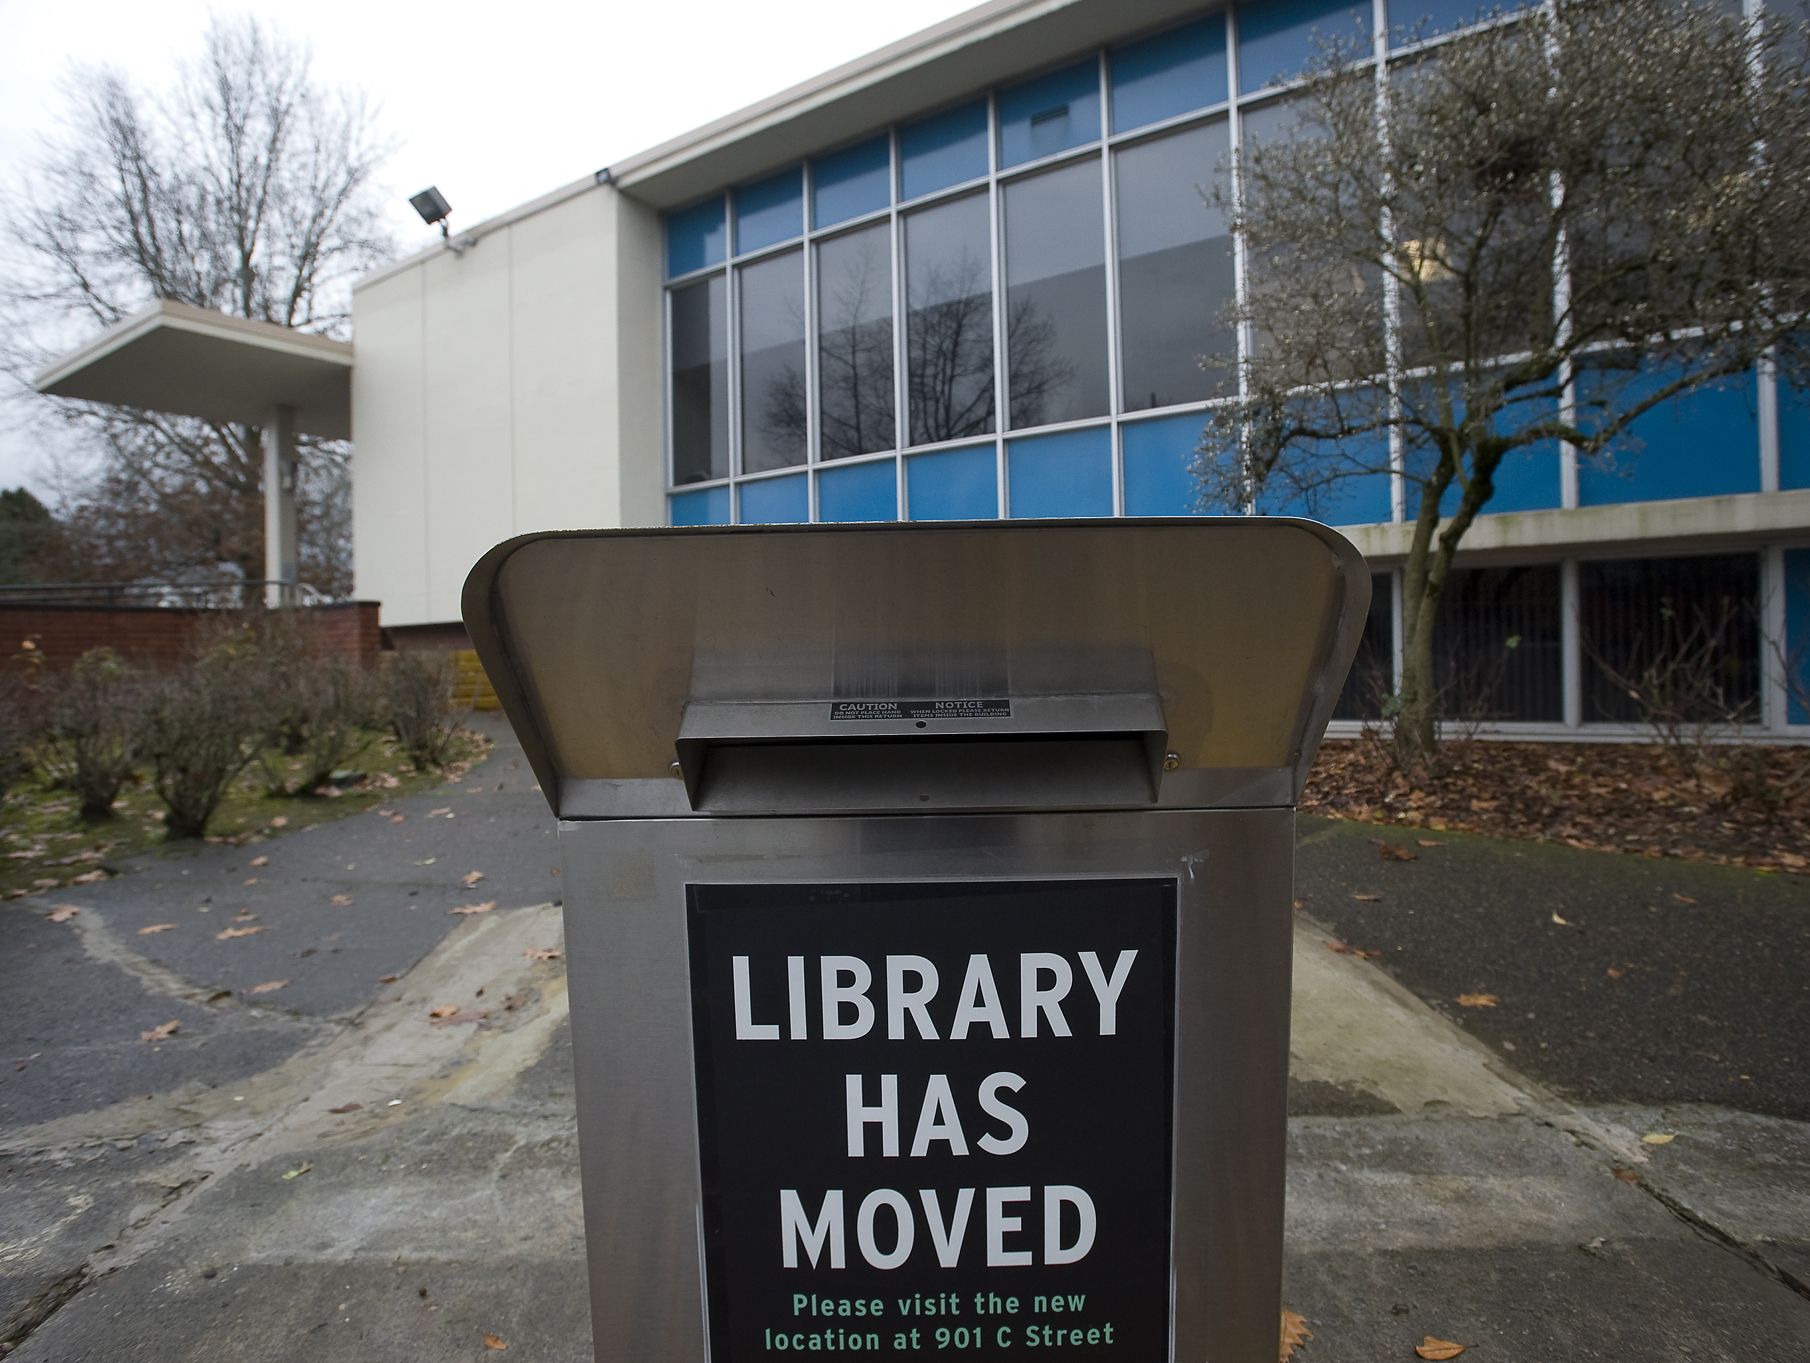 The stacks and periodicals are gone but the former Fort Vancouver Regional Library District building (also formerly called Vancouver community Library) now houses its operations center on both of its levels.